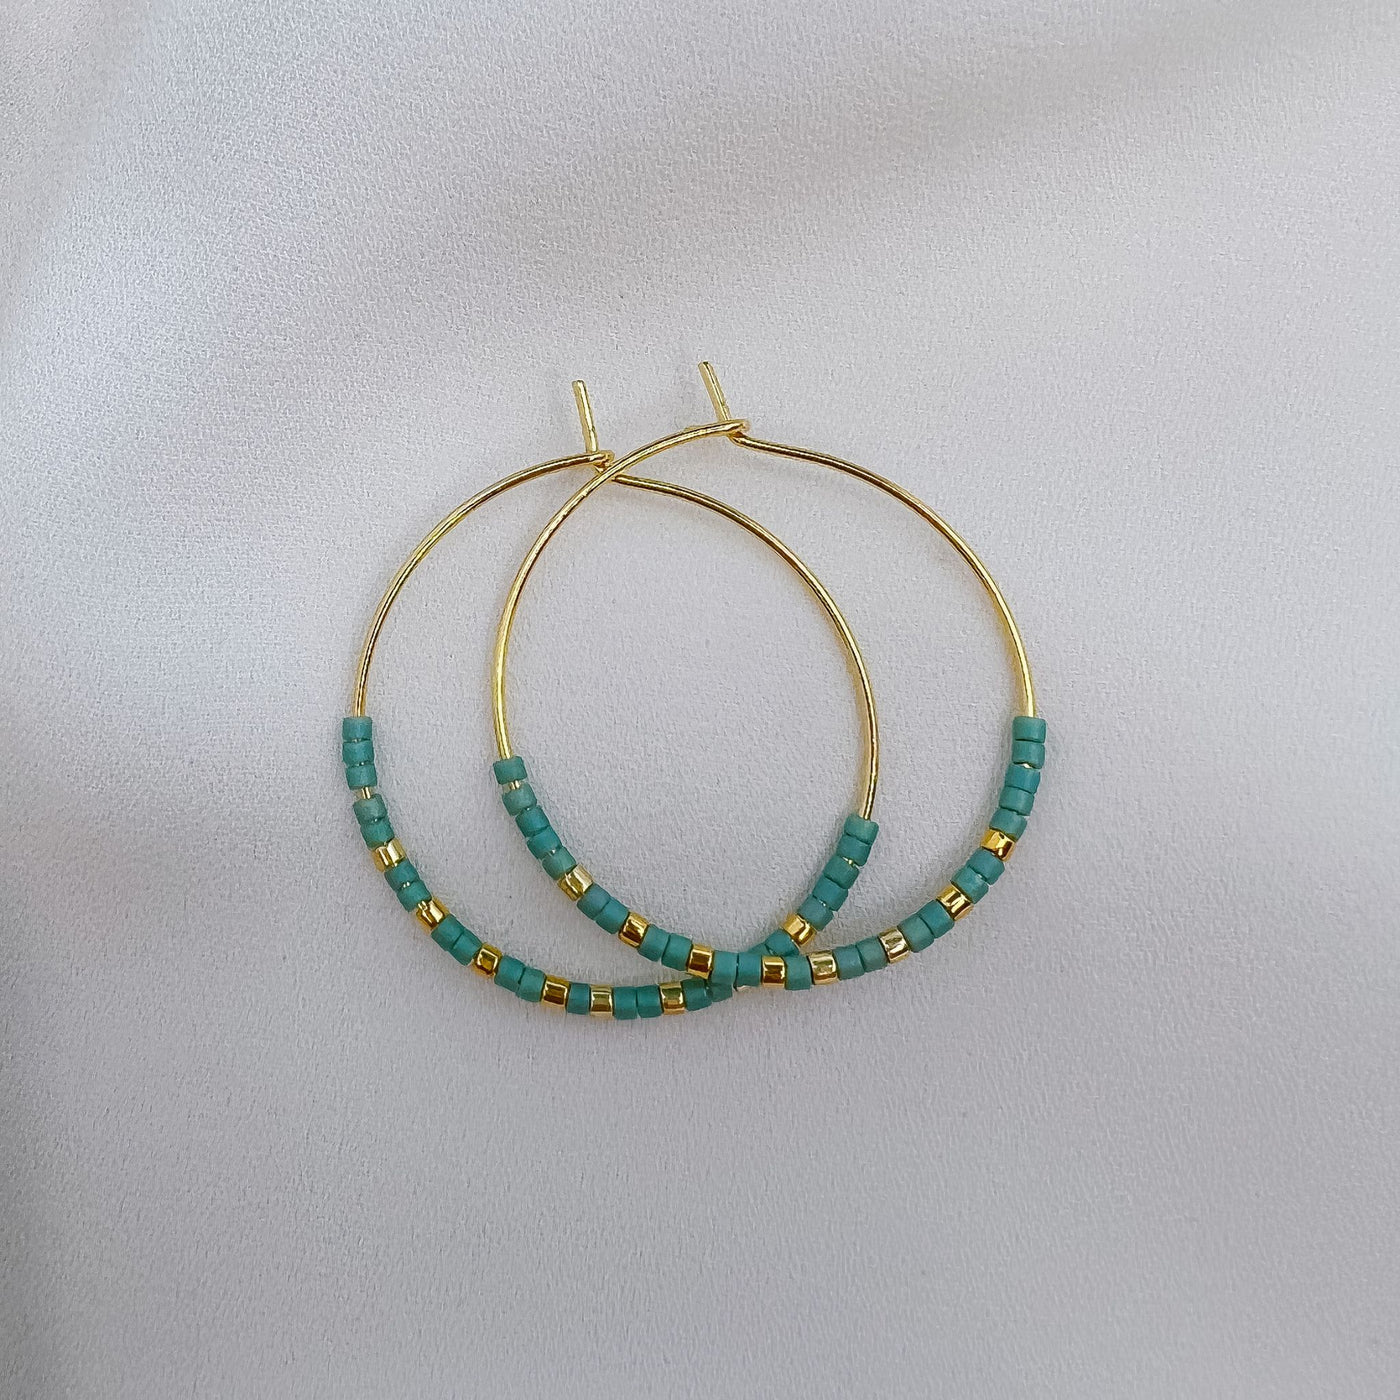 Teal coloured miyuki beads on a gold hoop earring with gold bead accents